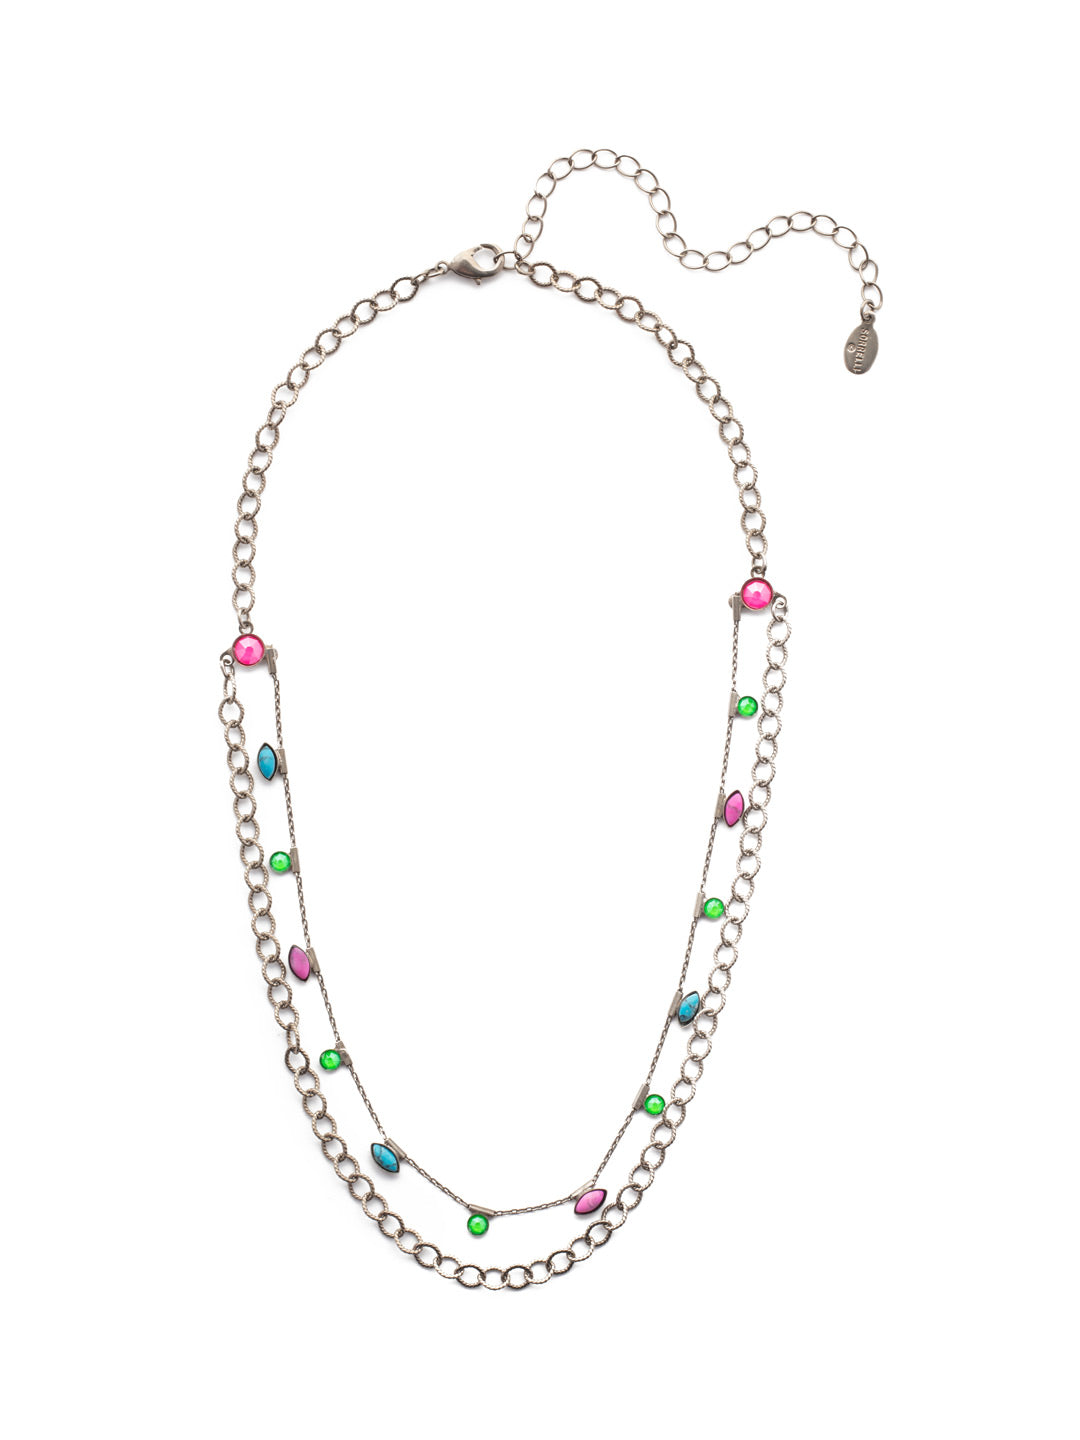 Cruella Layered Necklace - NEV8ASWDW - <p>Fasten on our Cruella Layered Necklace and get two looks in one: chainlink metal and signature Sorrelli sparkle coming from round and navette stones. From Sorrelli's Wild Watermelon collection in our Antique Silver-tone finish.</p>